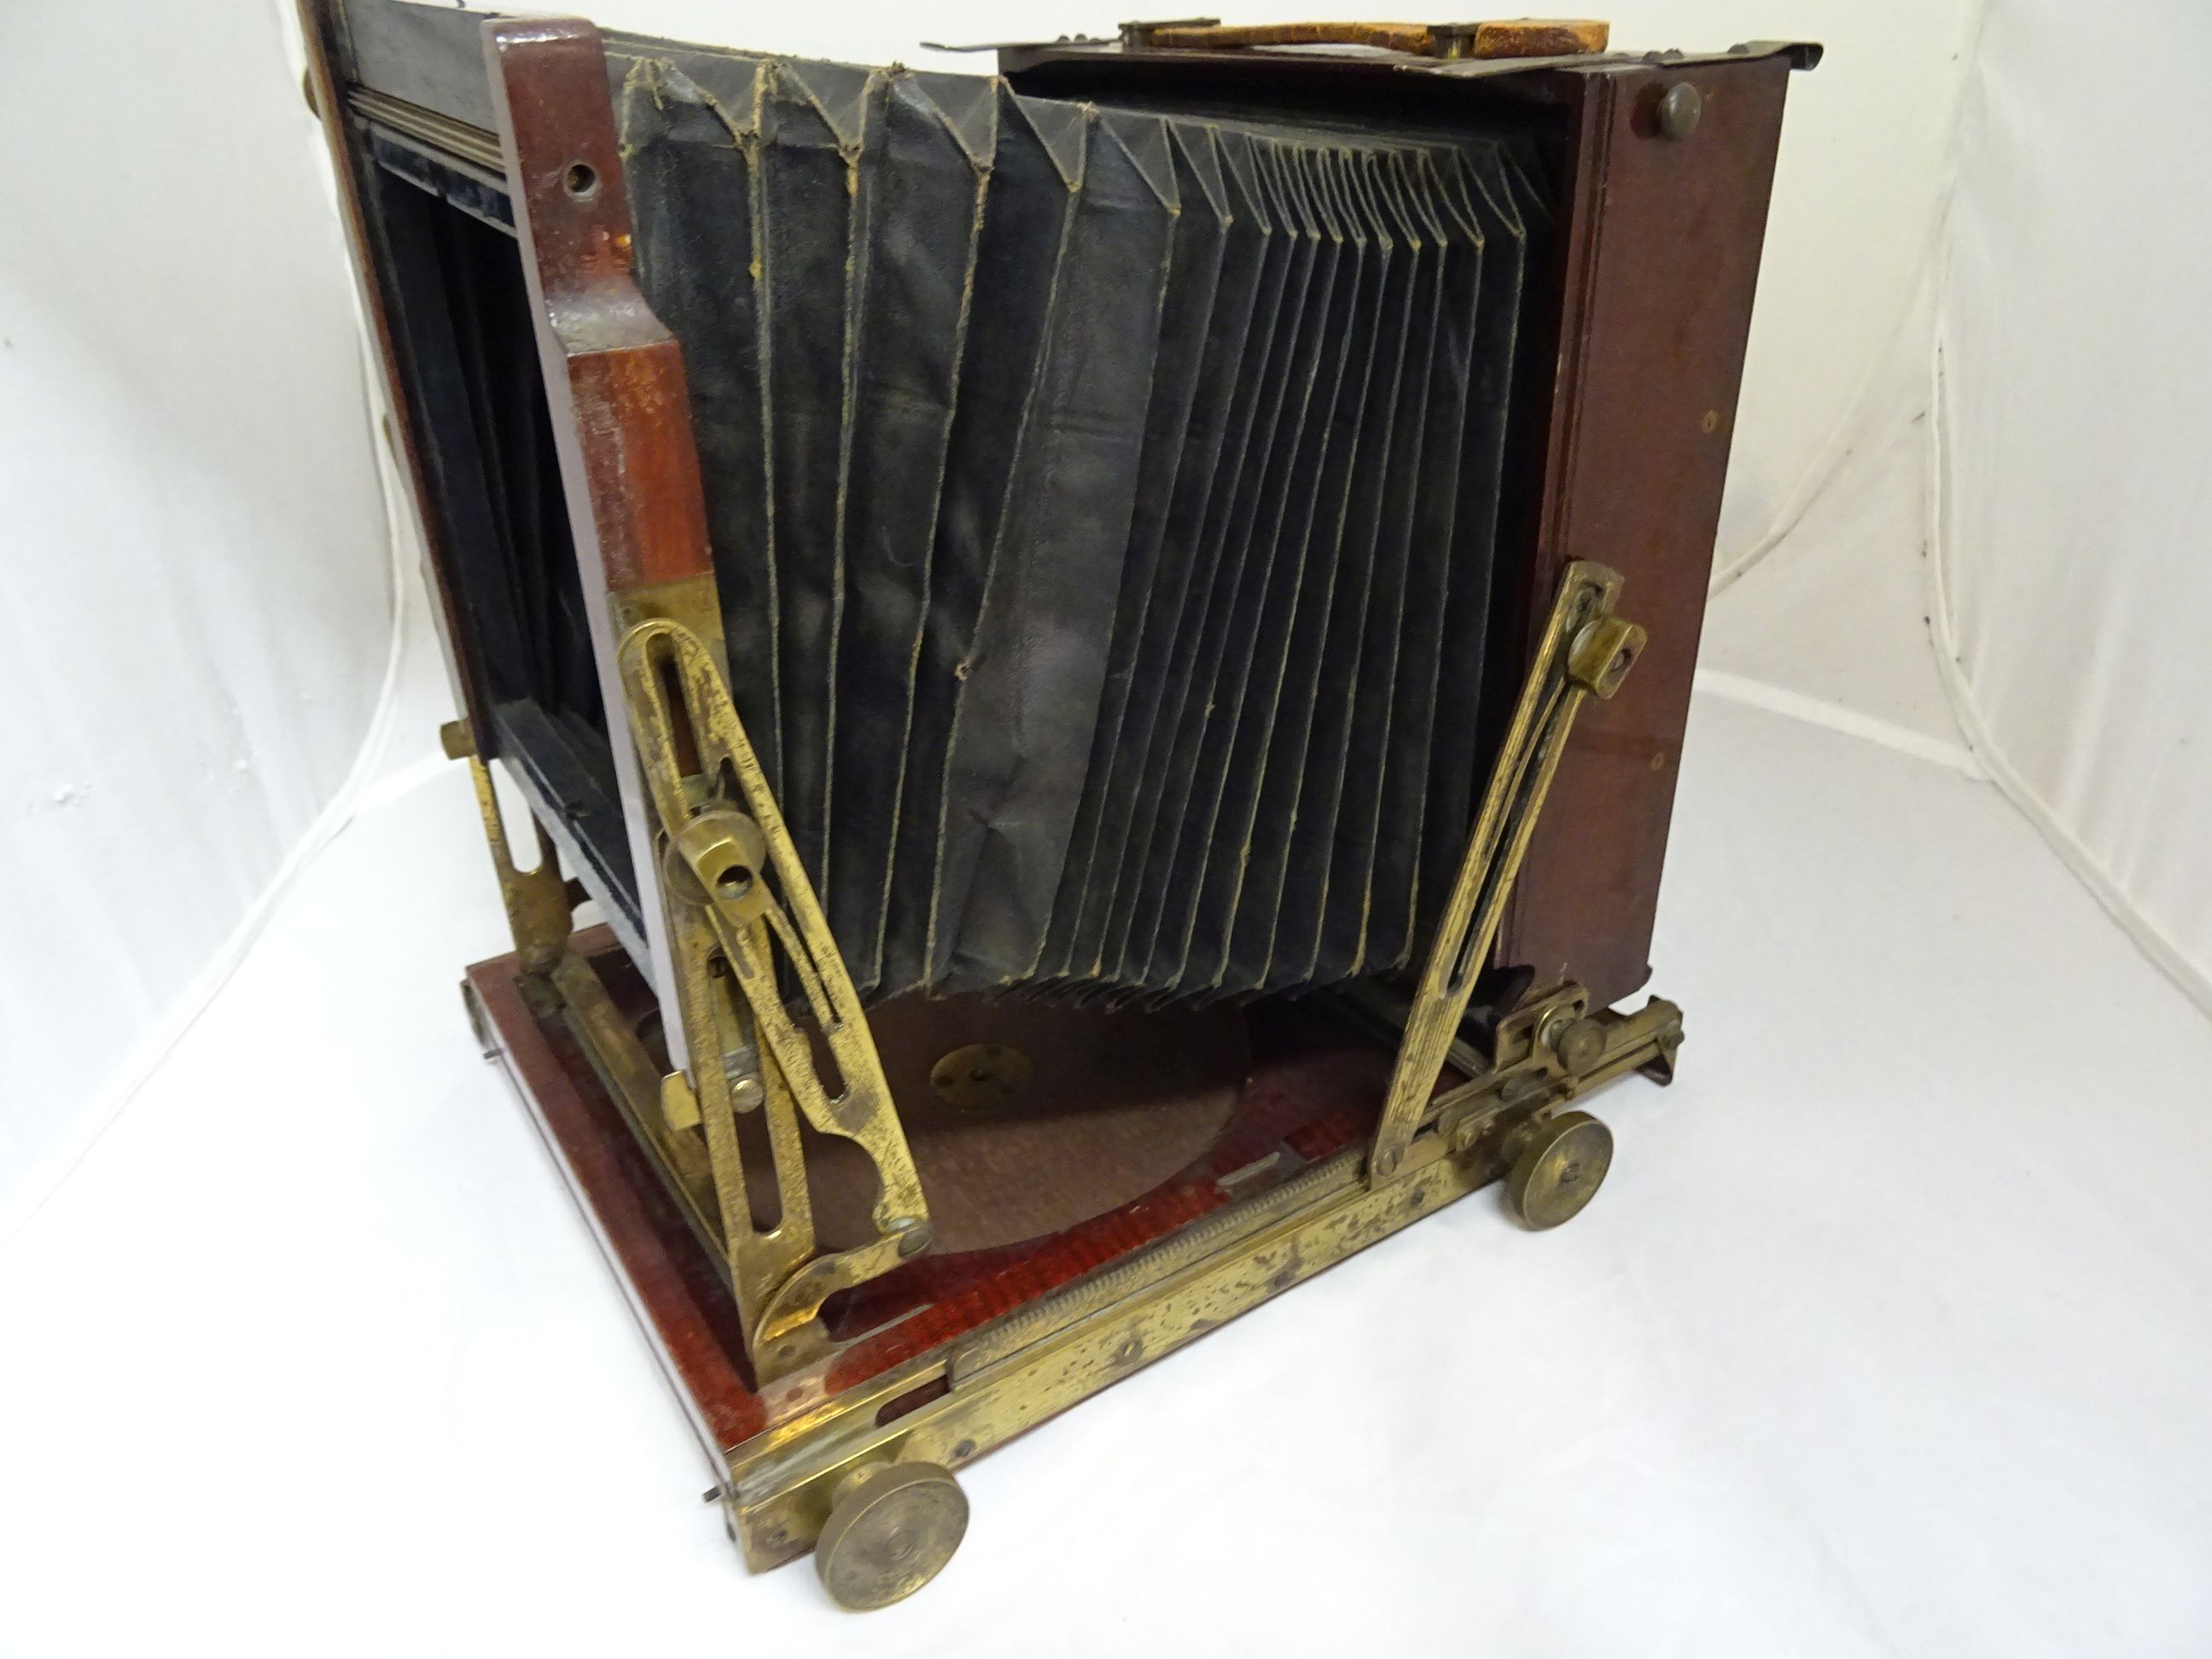 Thornton Pickard Royal Ruby plate camera equipment & accessories - Image 16 of 22